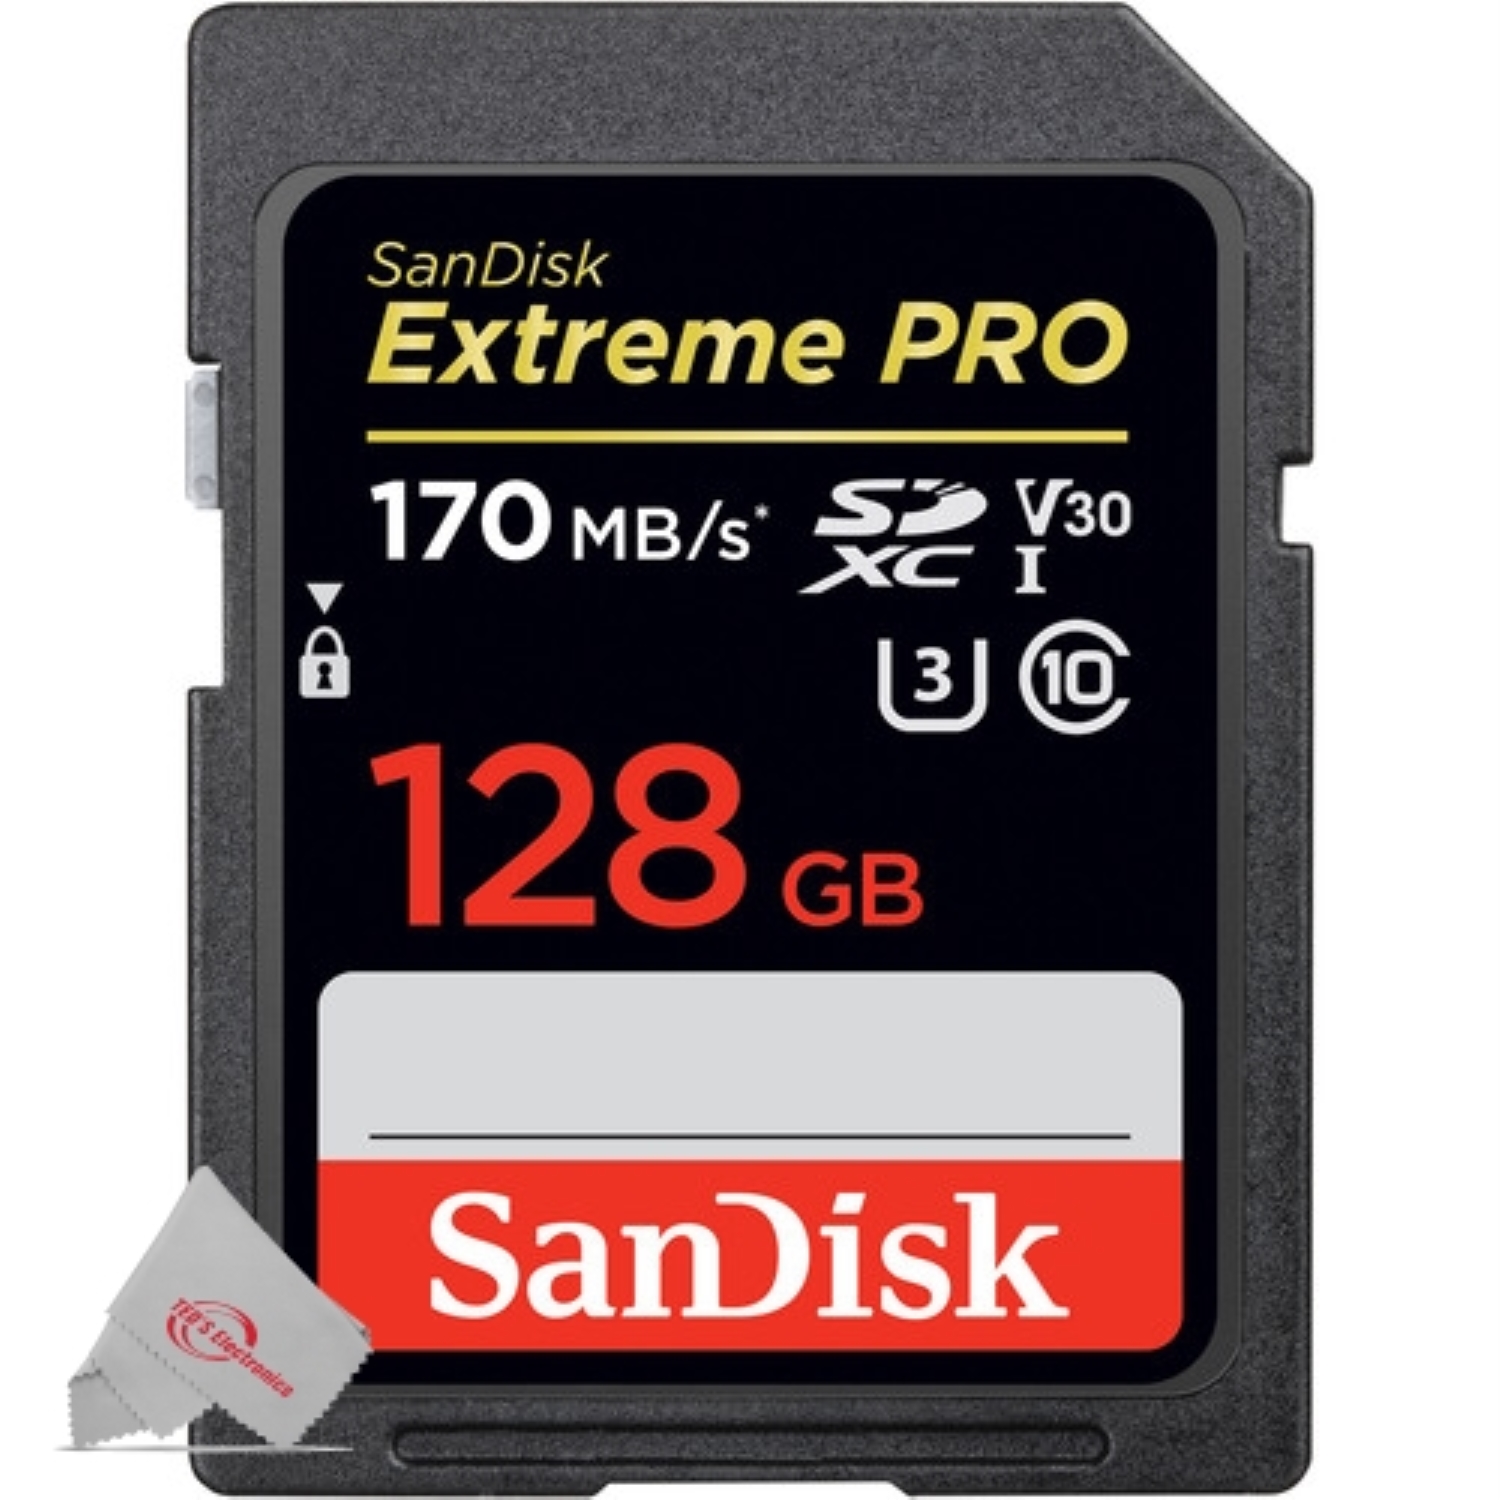 2x SanDisk Extreme Pro 128GB SDXC UHS-I/U3 V30 Class 10 Memory Card, Speed Up to 170MB/s (SDSDXXY-128G-GN4IN) - image 2 of 3